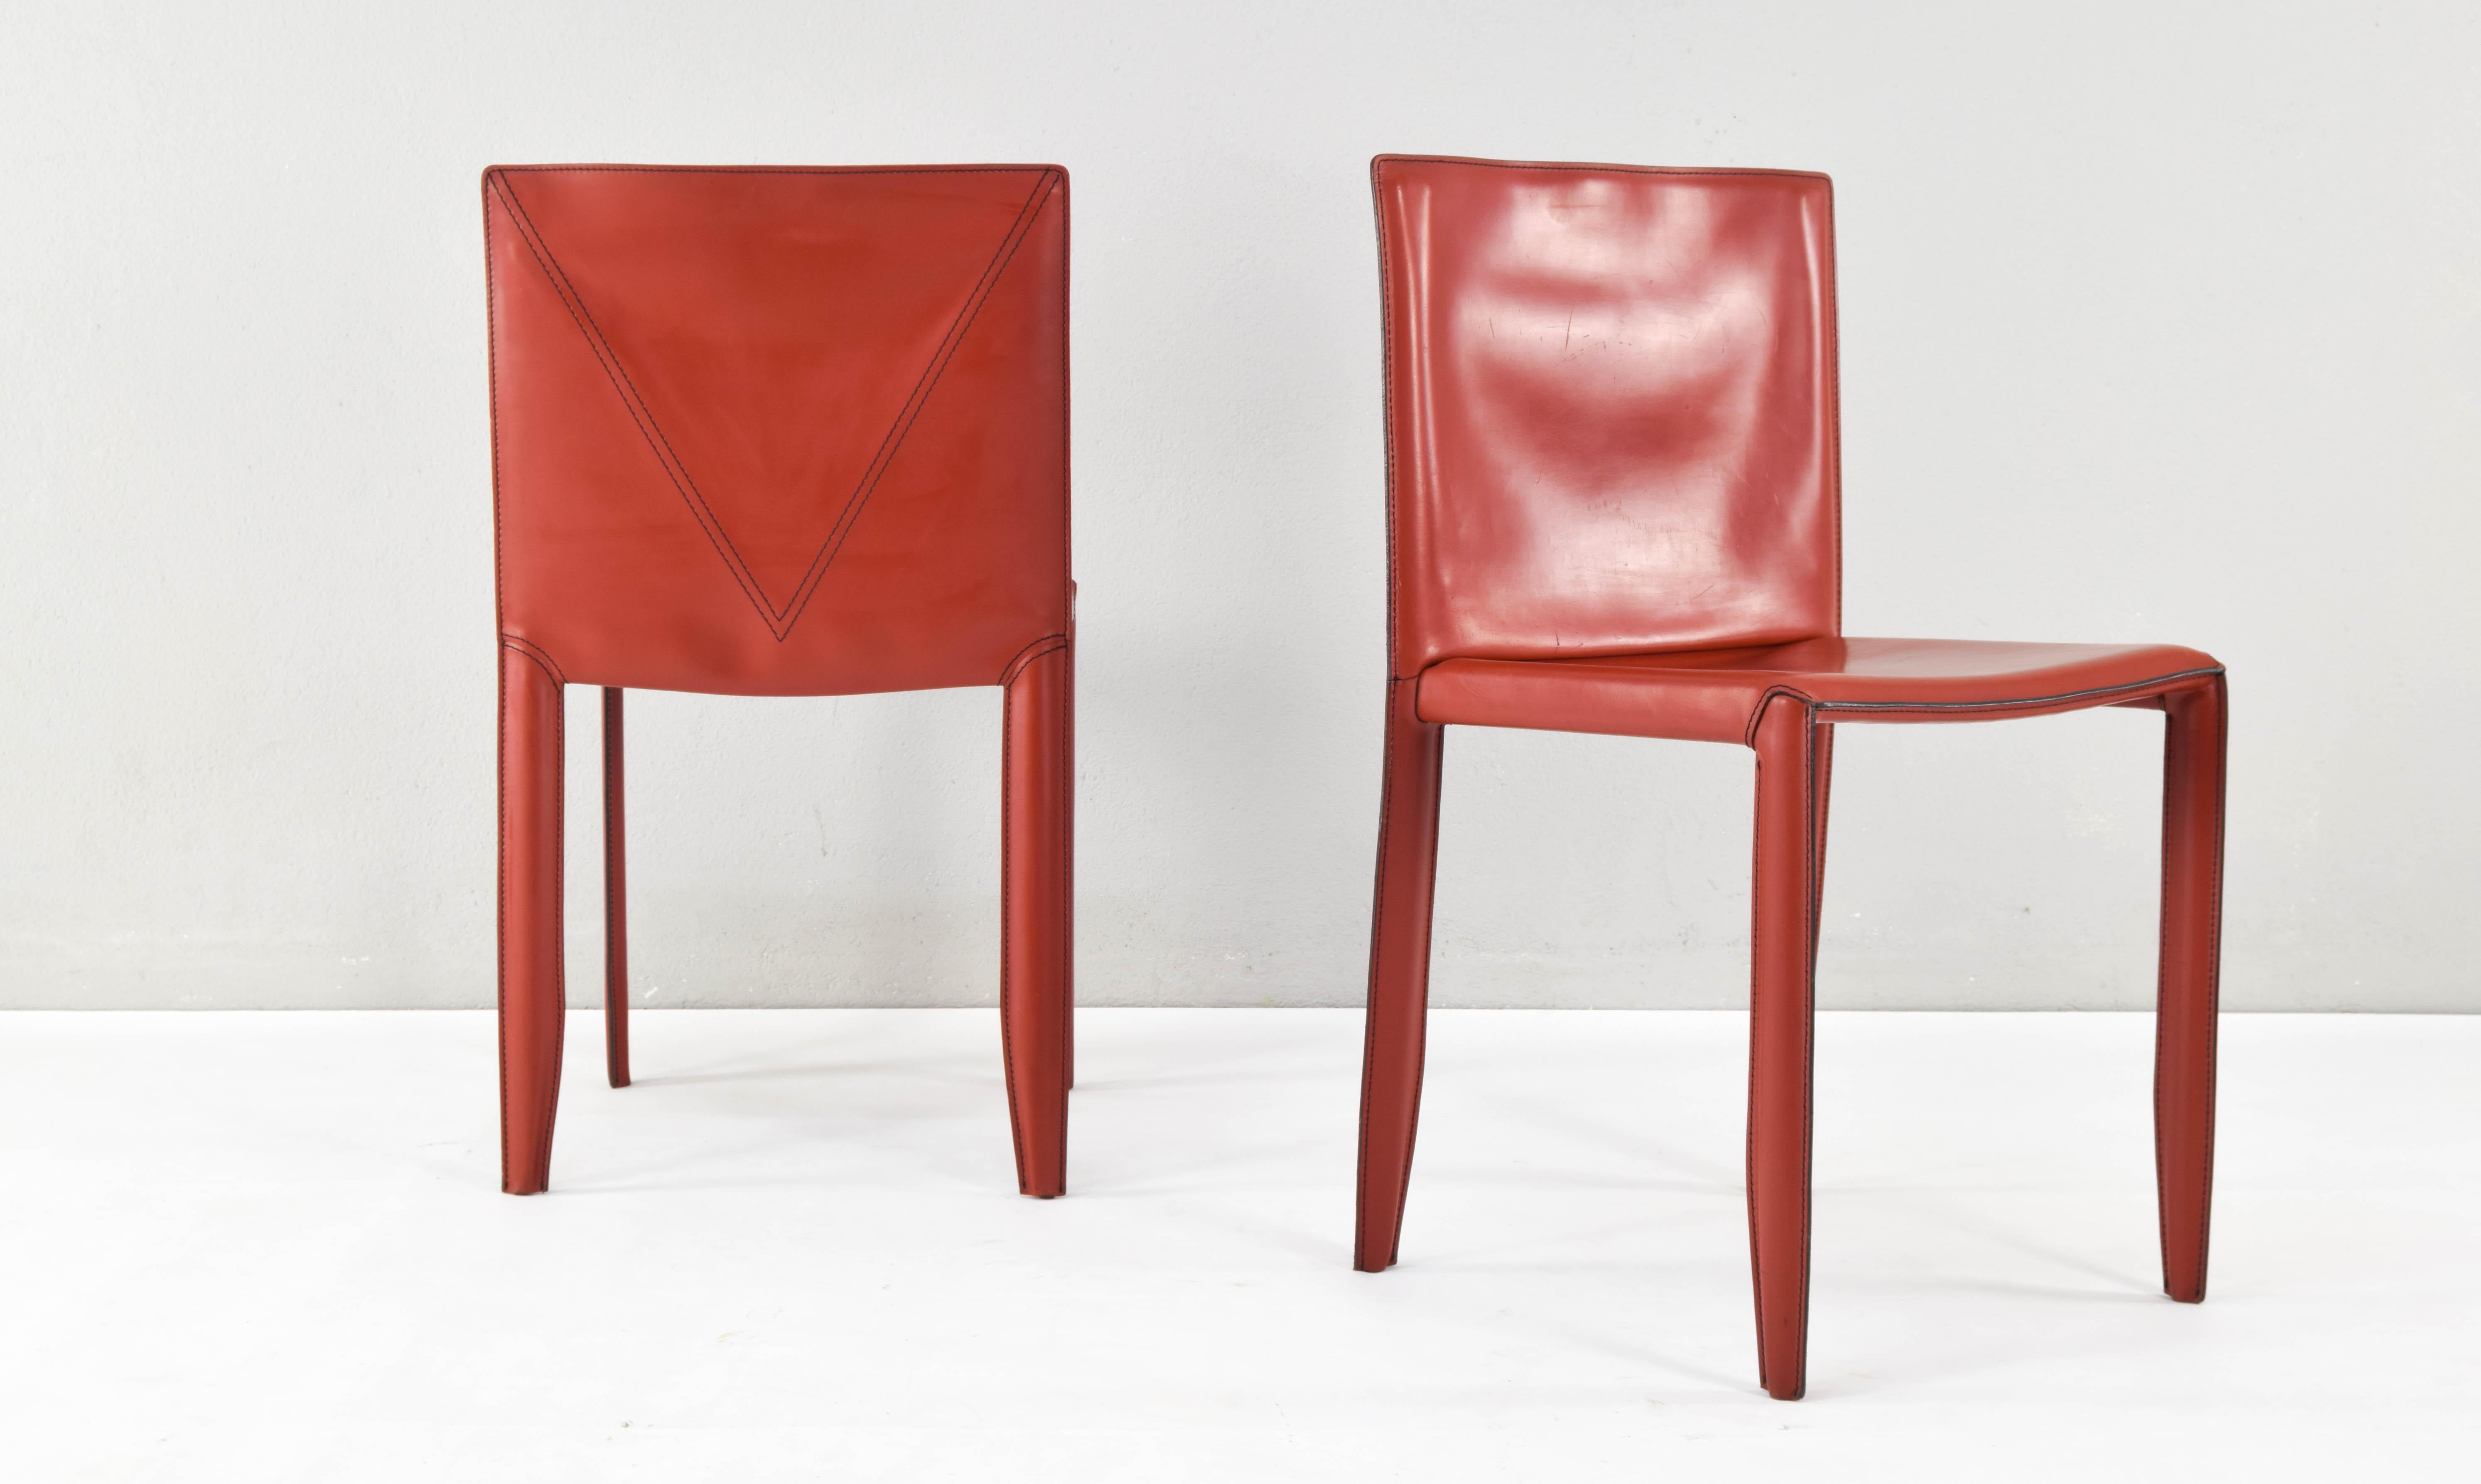 Piuma Italian Modern Leather Chairs Set of Two by Studio Kronos for Cattelan 90s 1